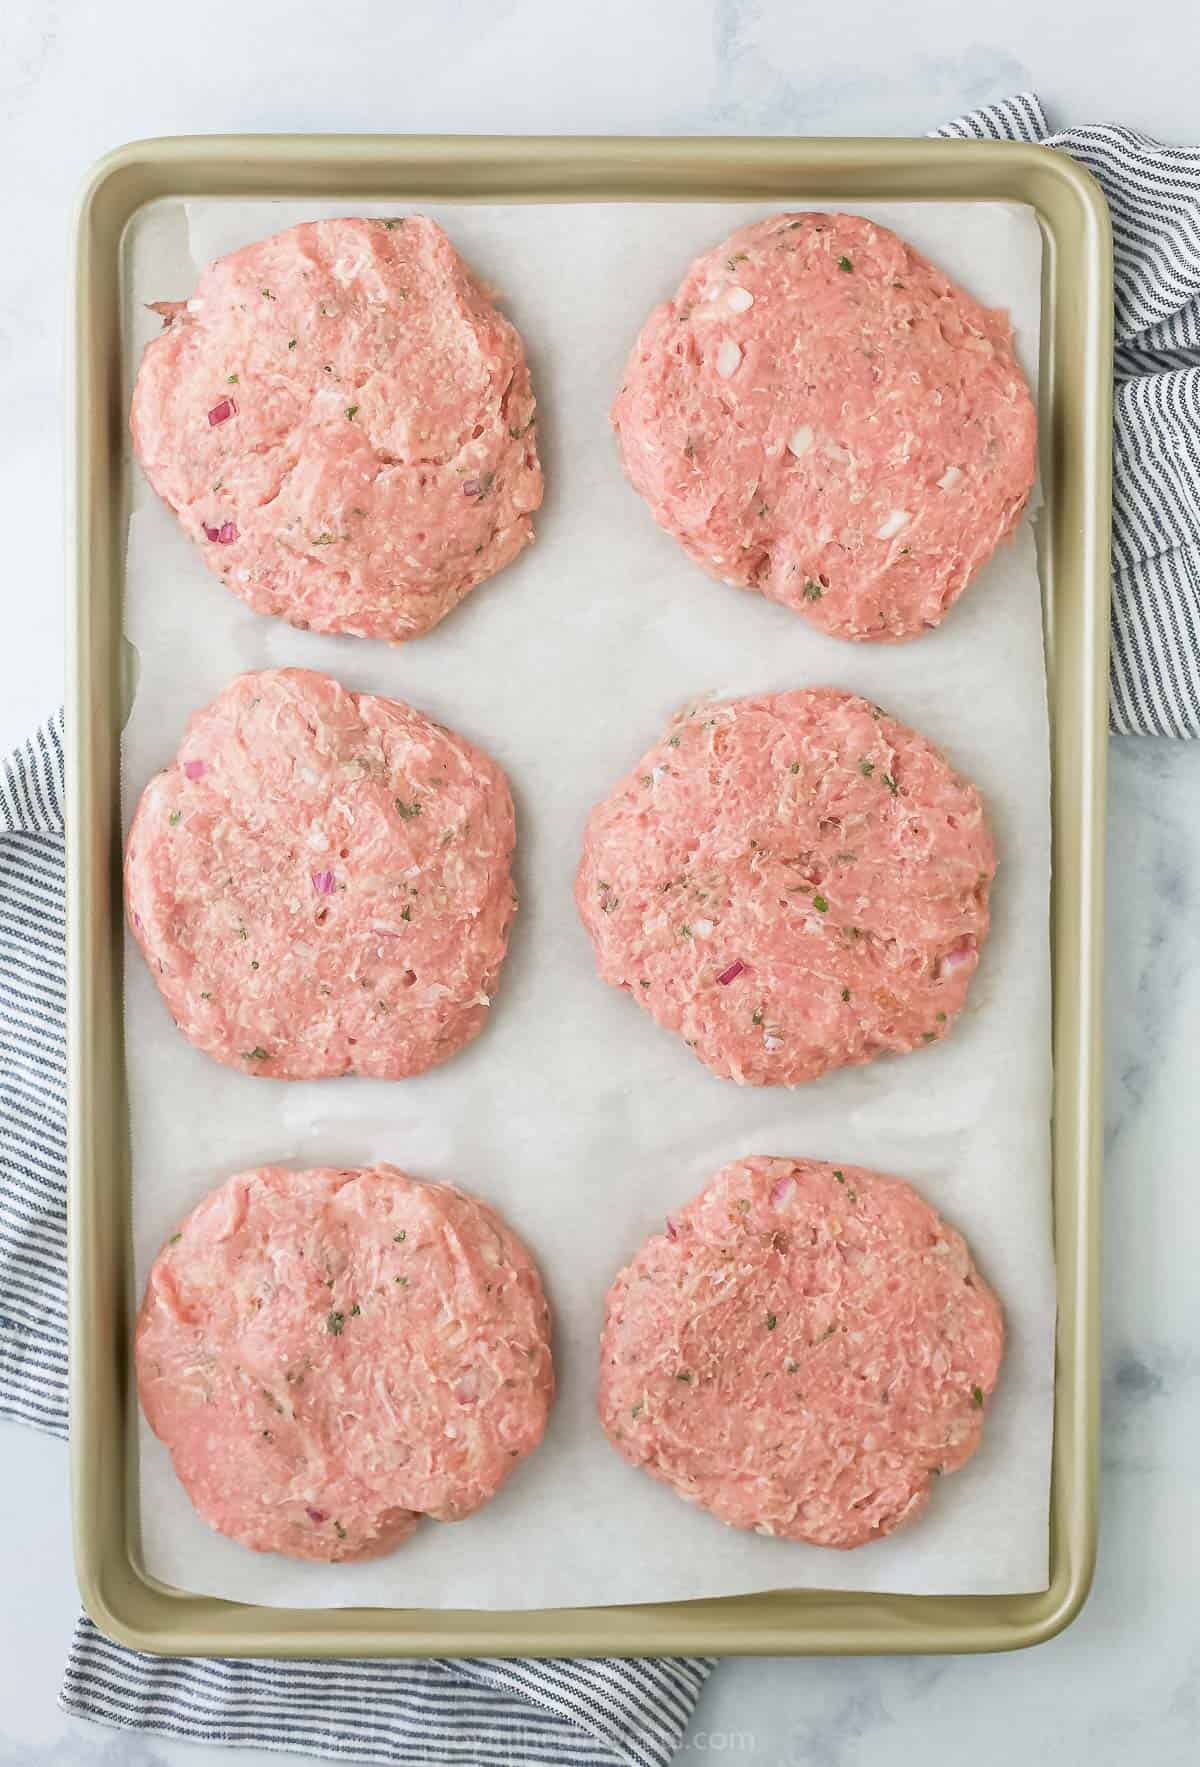 Six raw turkey patties on a cookie sheet lined with parchment paper